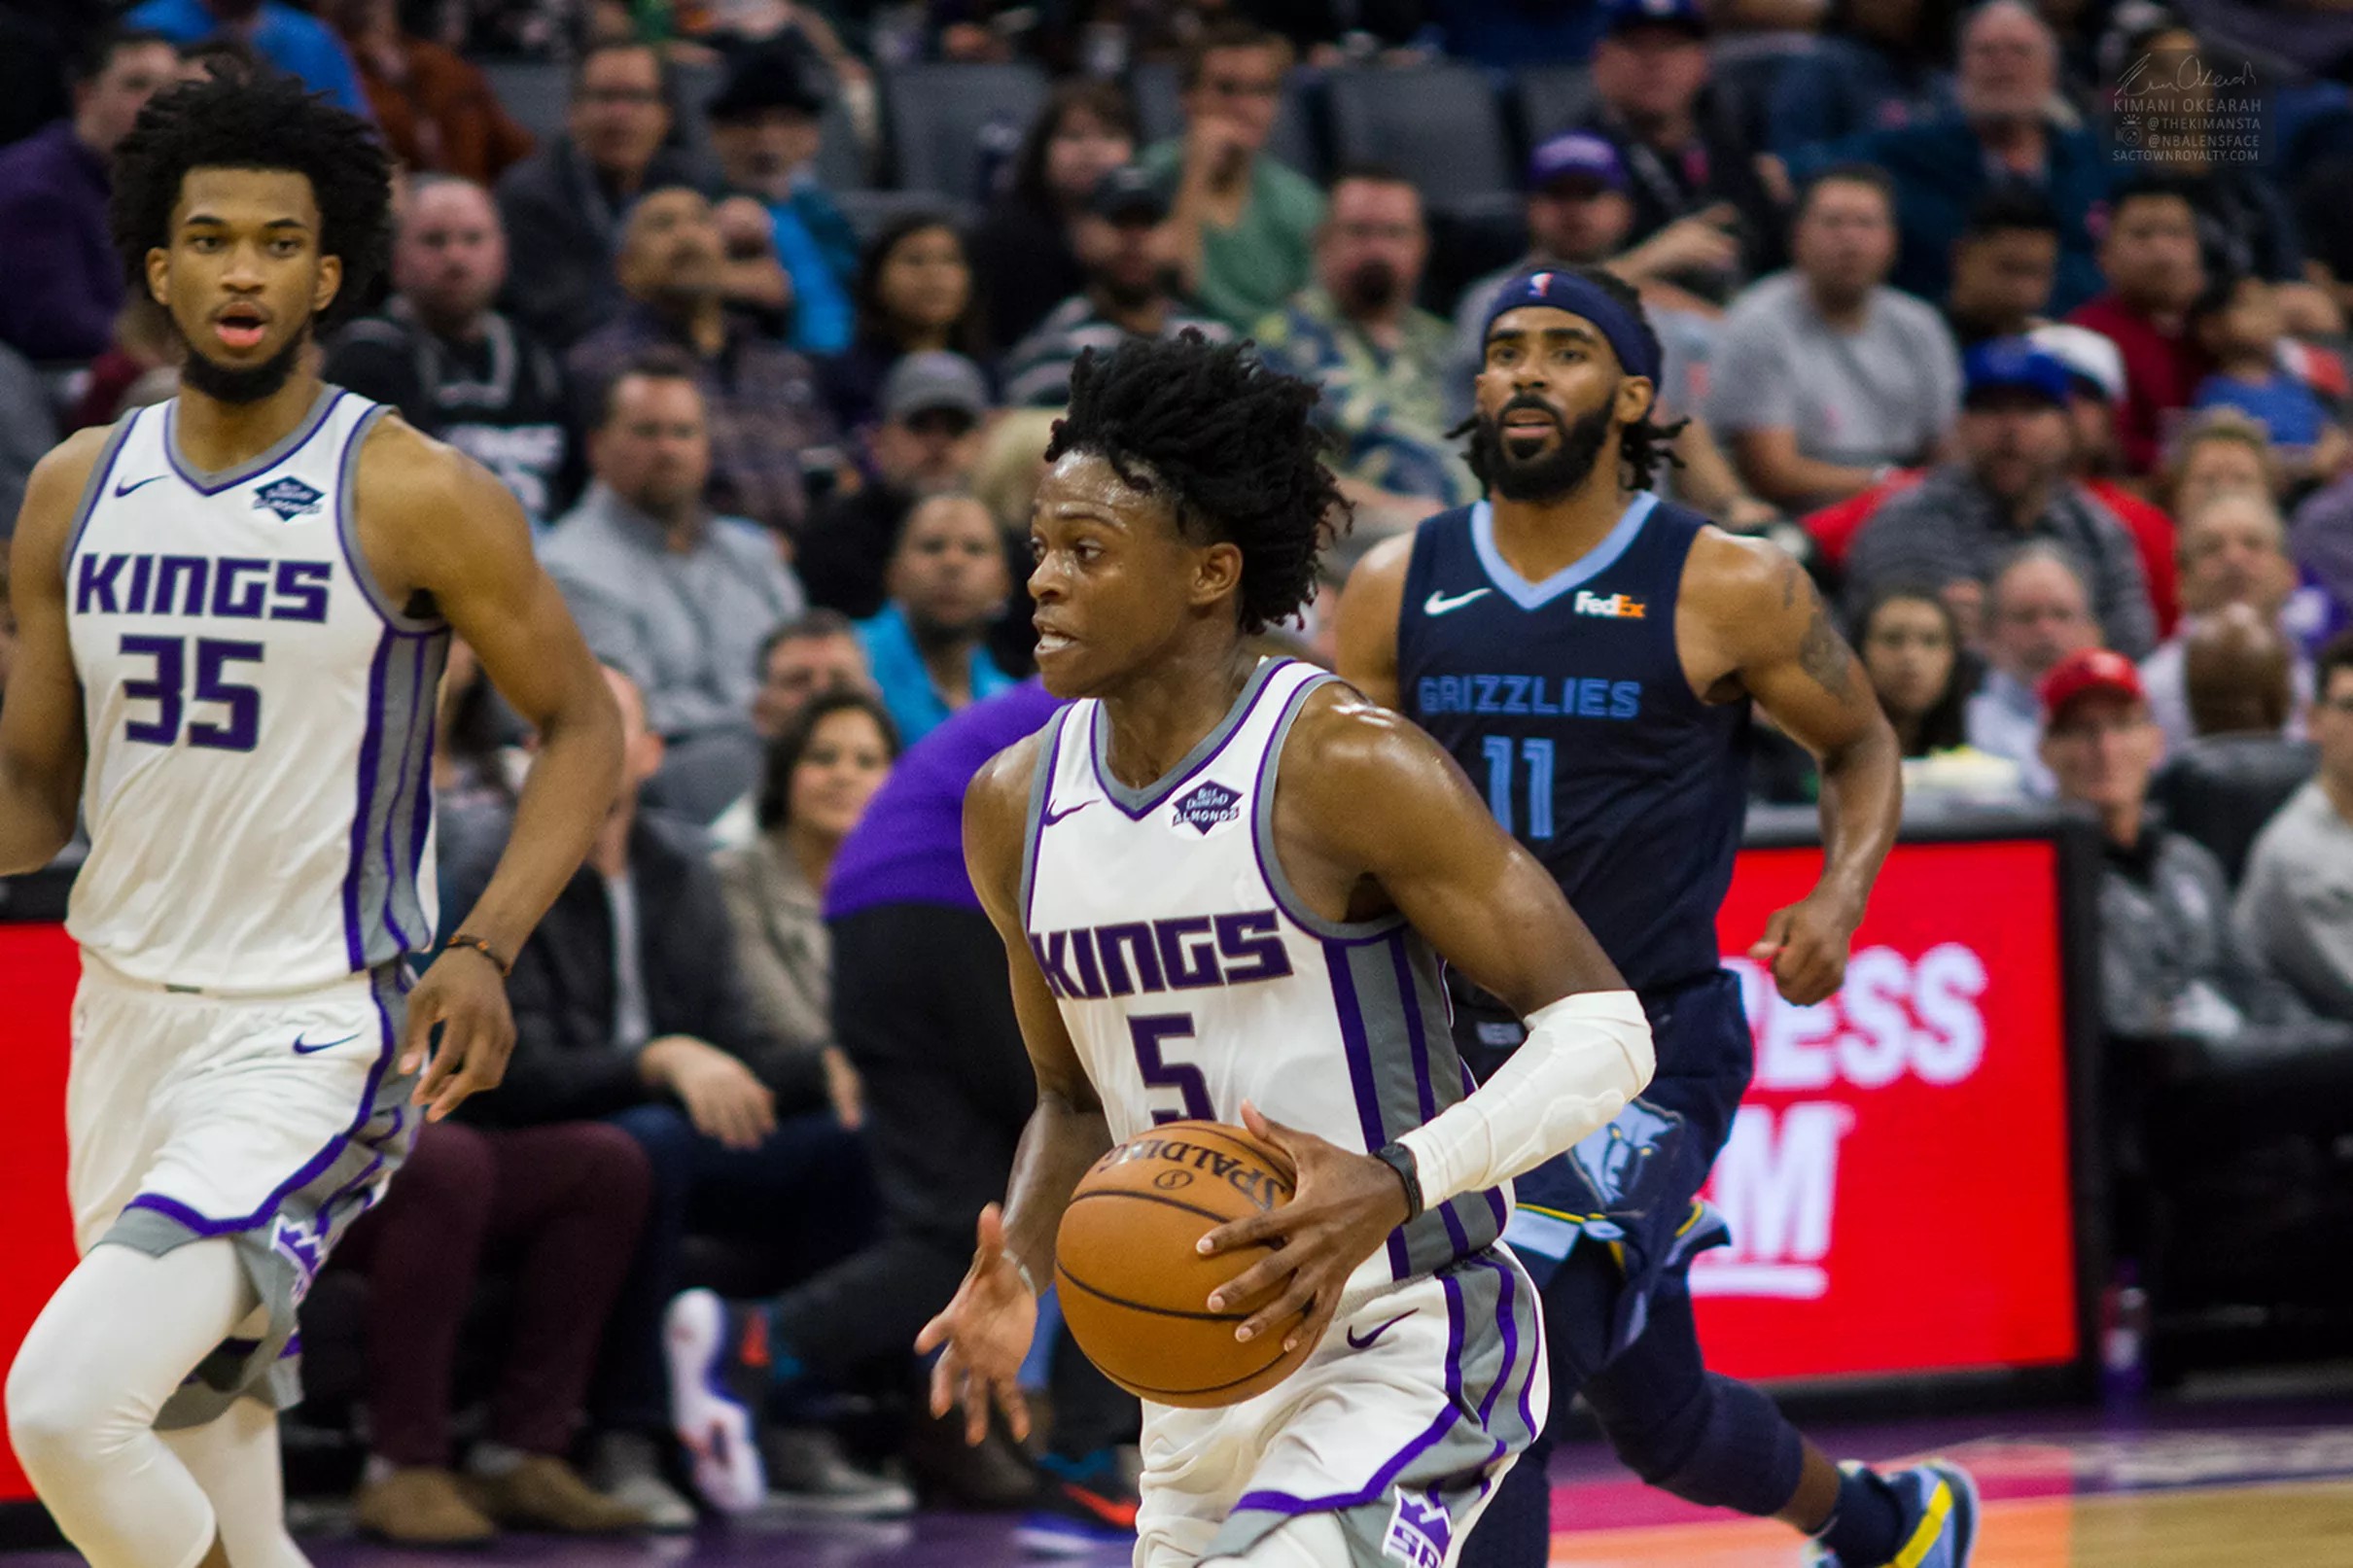 Kings vs. Grizzlies Preview The Fast and Laborious